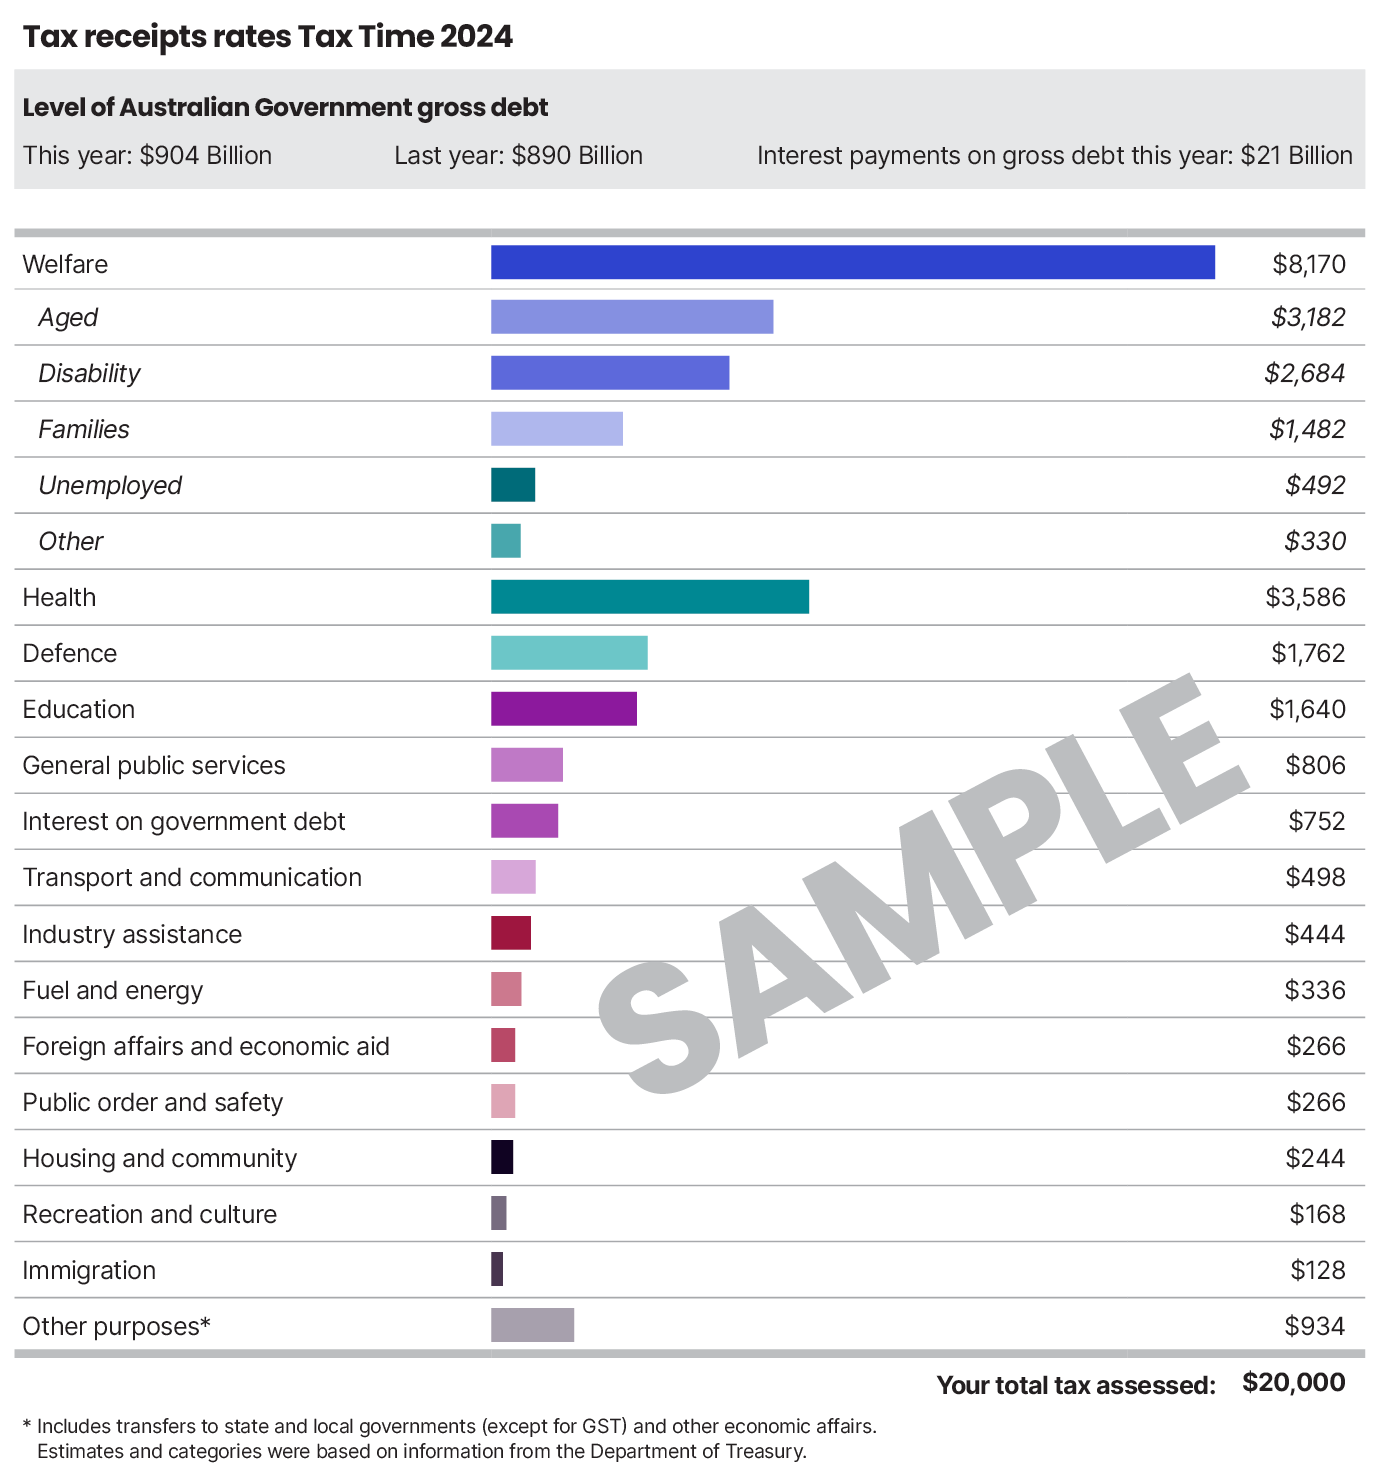 Sample imagery of a tax receipt for a tax payer whose total tax assessed was $20,000. Coloured bars show the amounts allocated to 20 expenditure categories including health, welfare, recreation and culture.